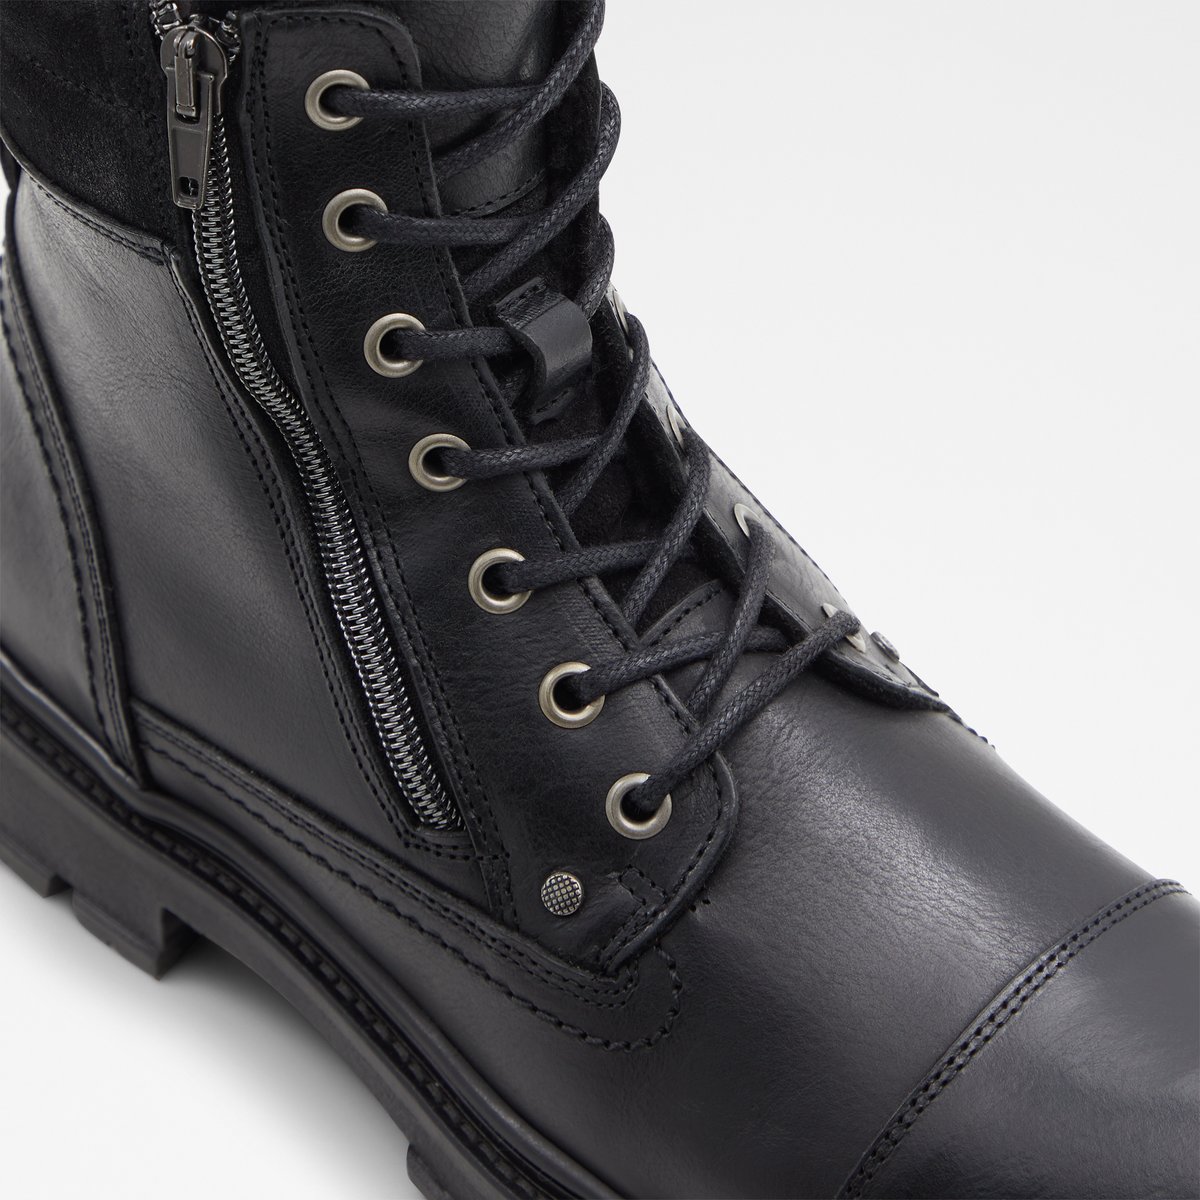 Caleseth Black Leather Smooth Men's Lace-Up Boots | ALDO US